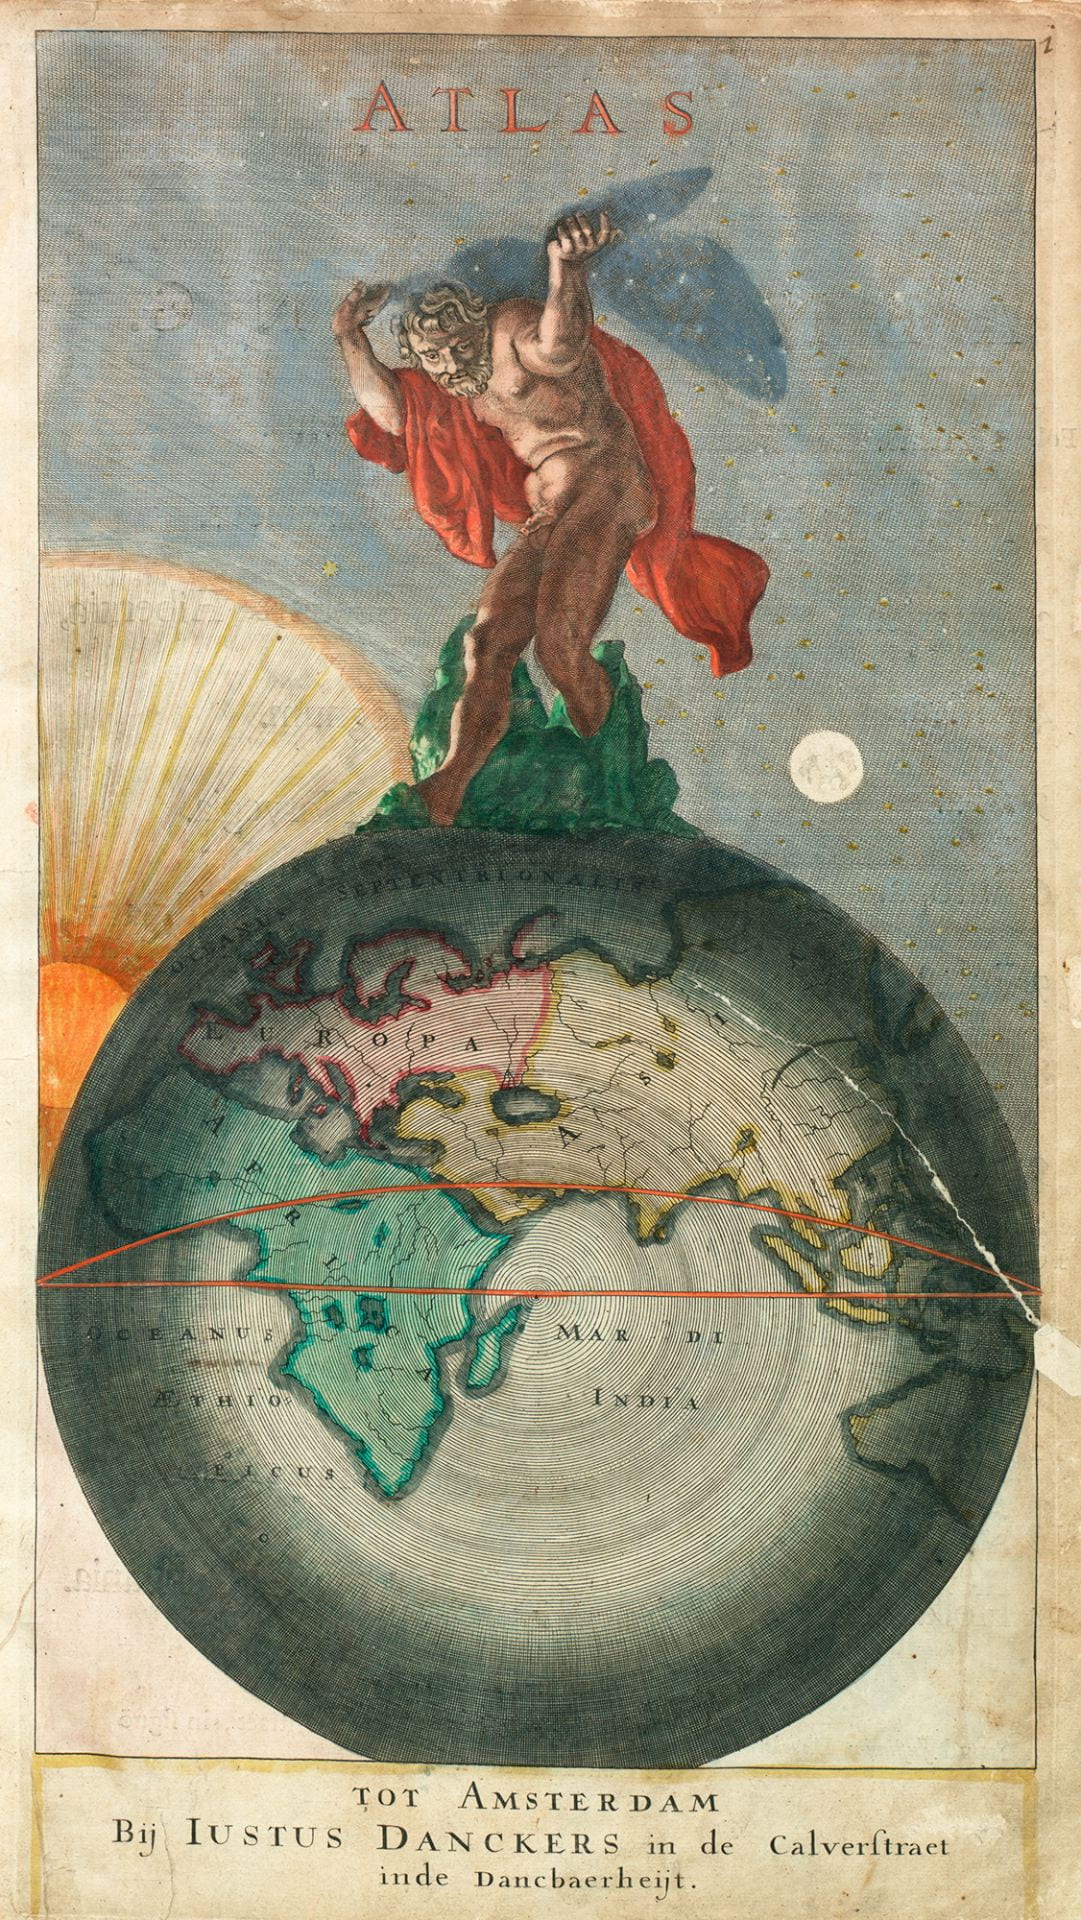 The title page from an atlas of 1690, produced by Justus Danckerts (1635-1701).